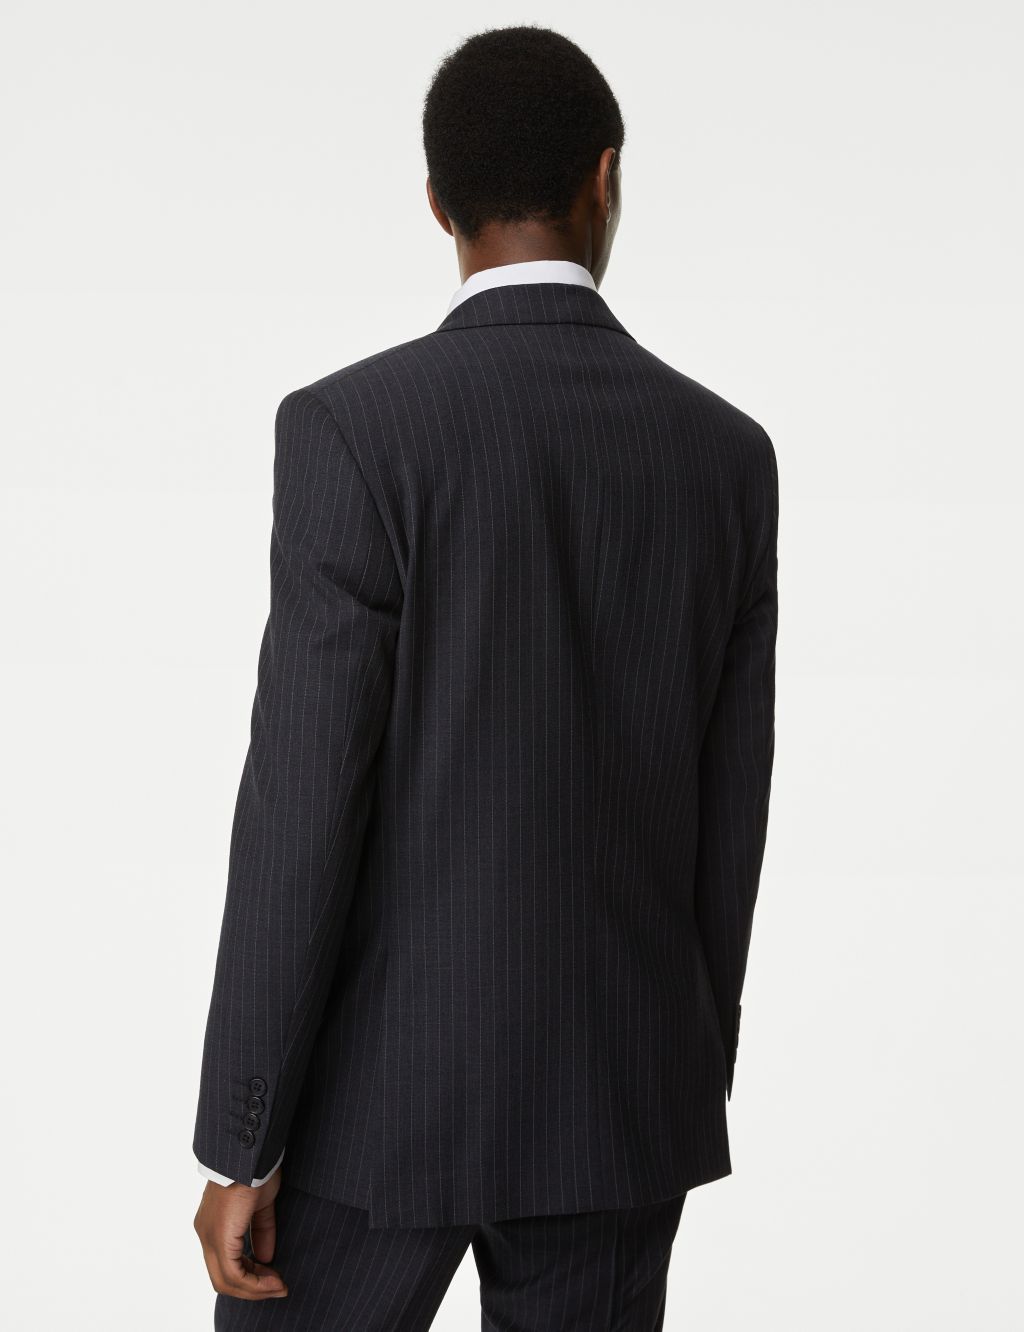 The Ultimate Tailored Fit Pinstripe Jacket image 5